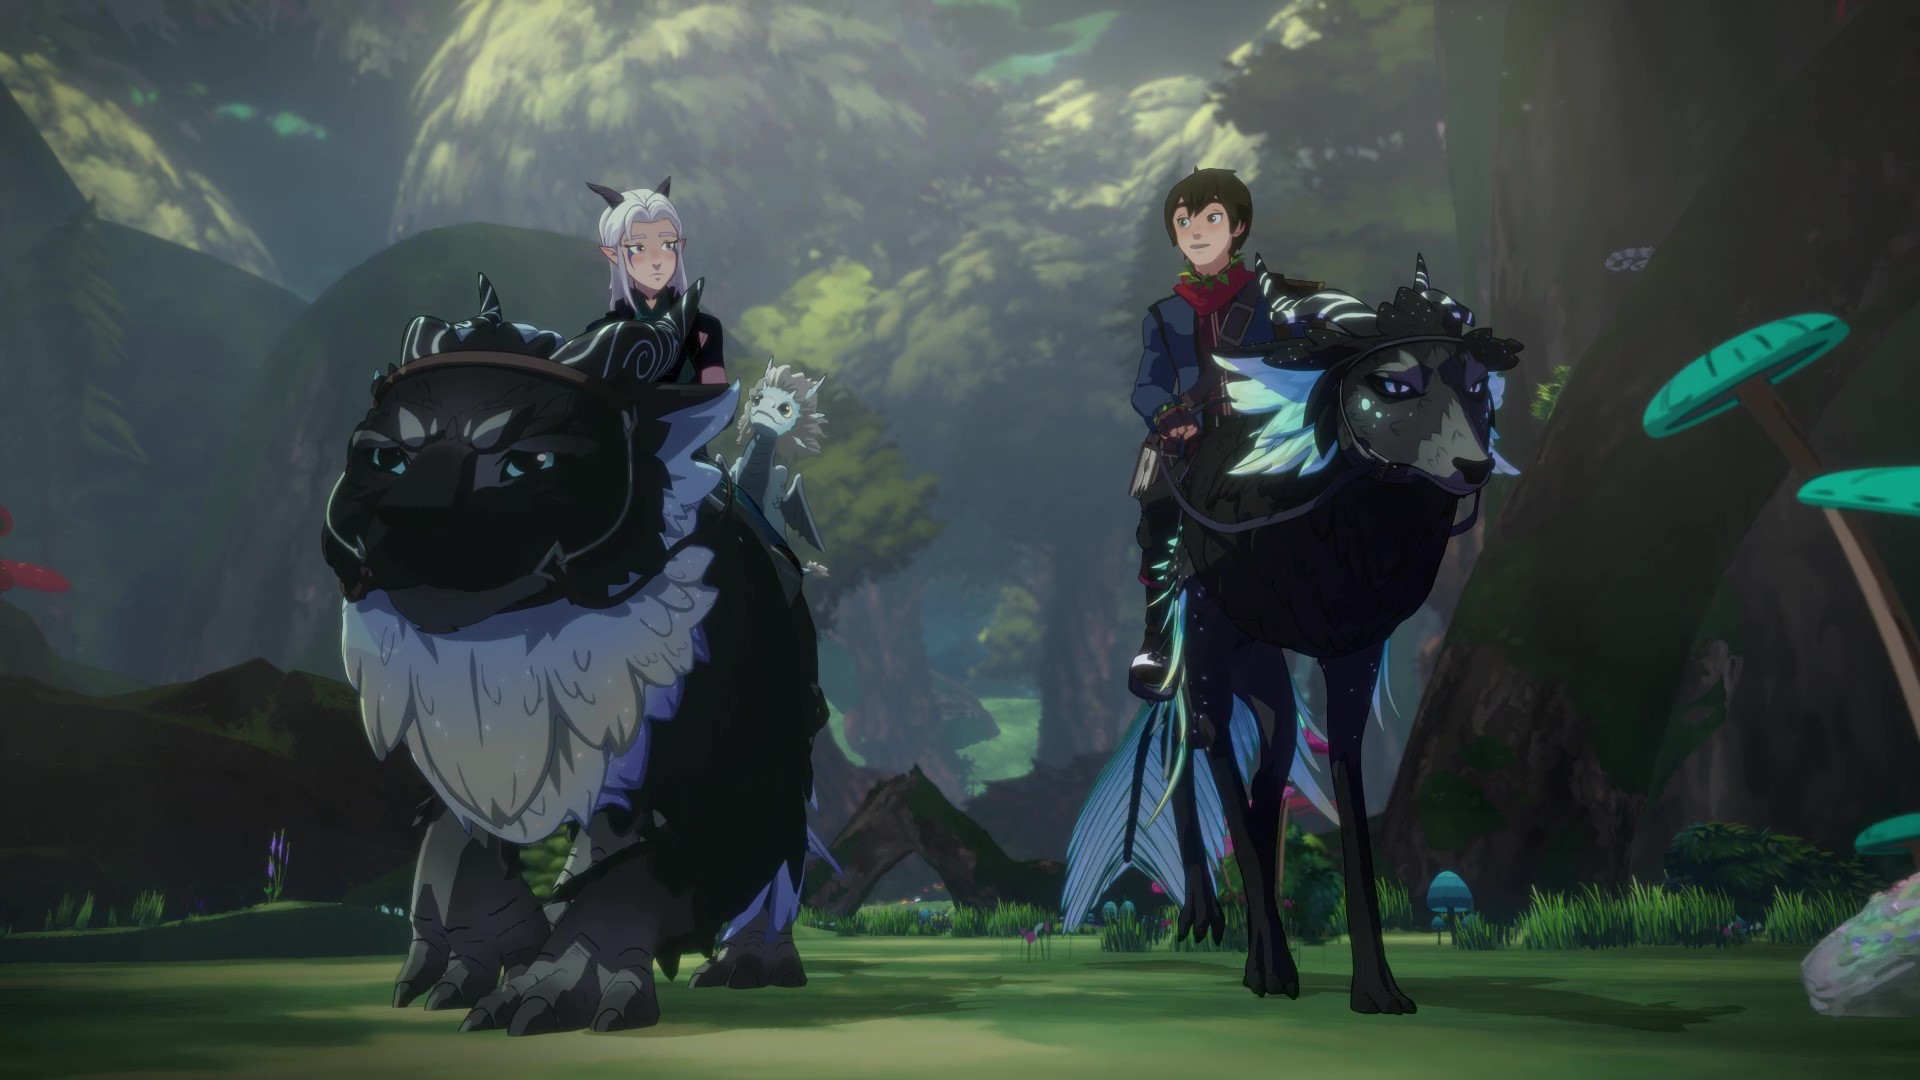 Callum and Rayla ride through a sunny Xadian forest on a moon-wolf and a moon-lion.